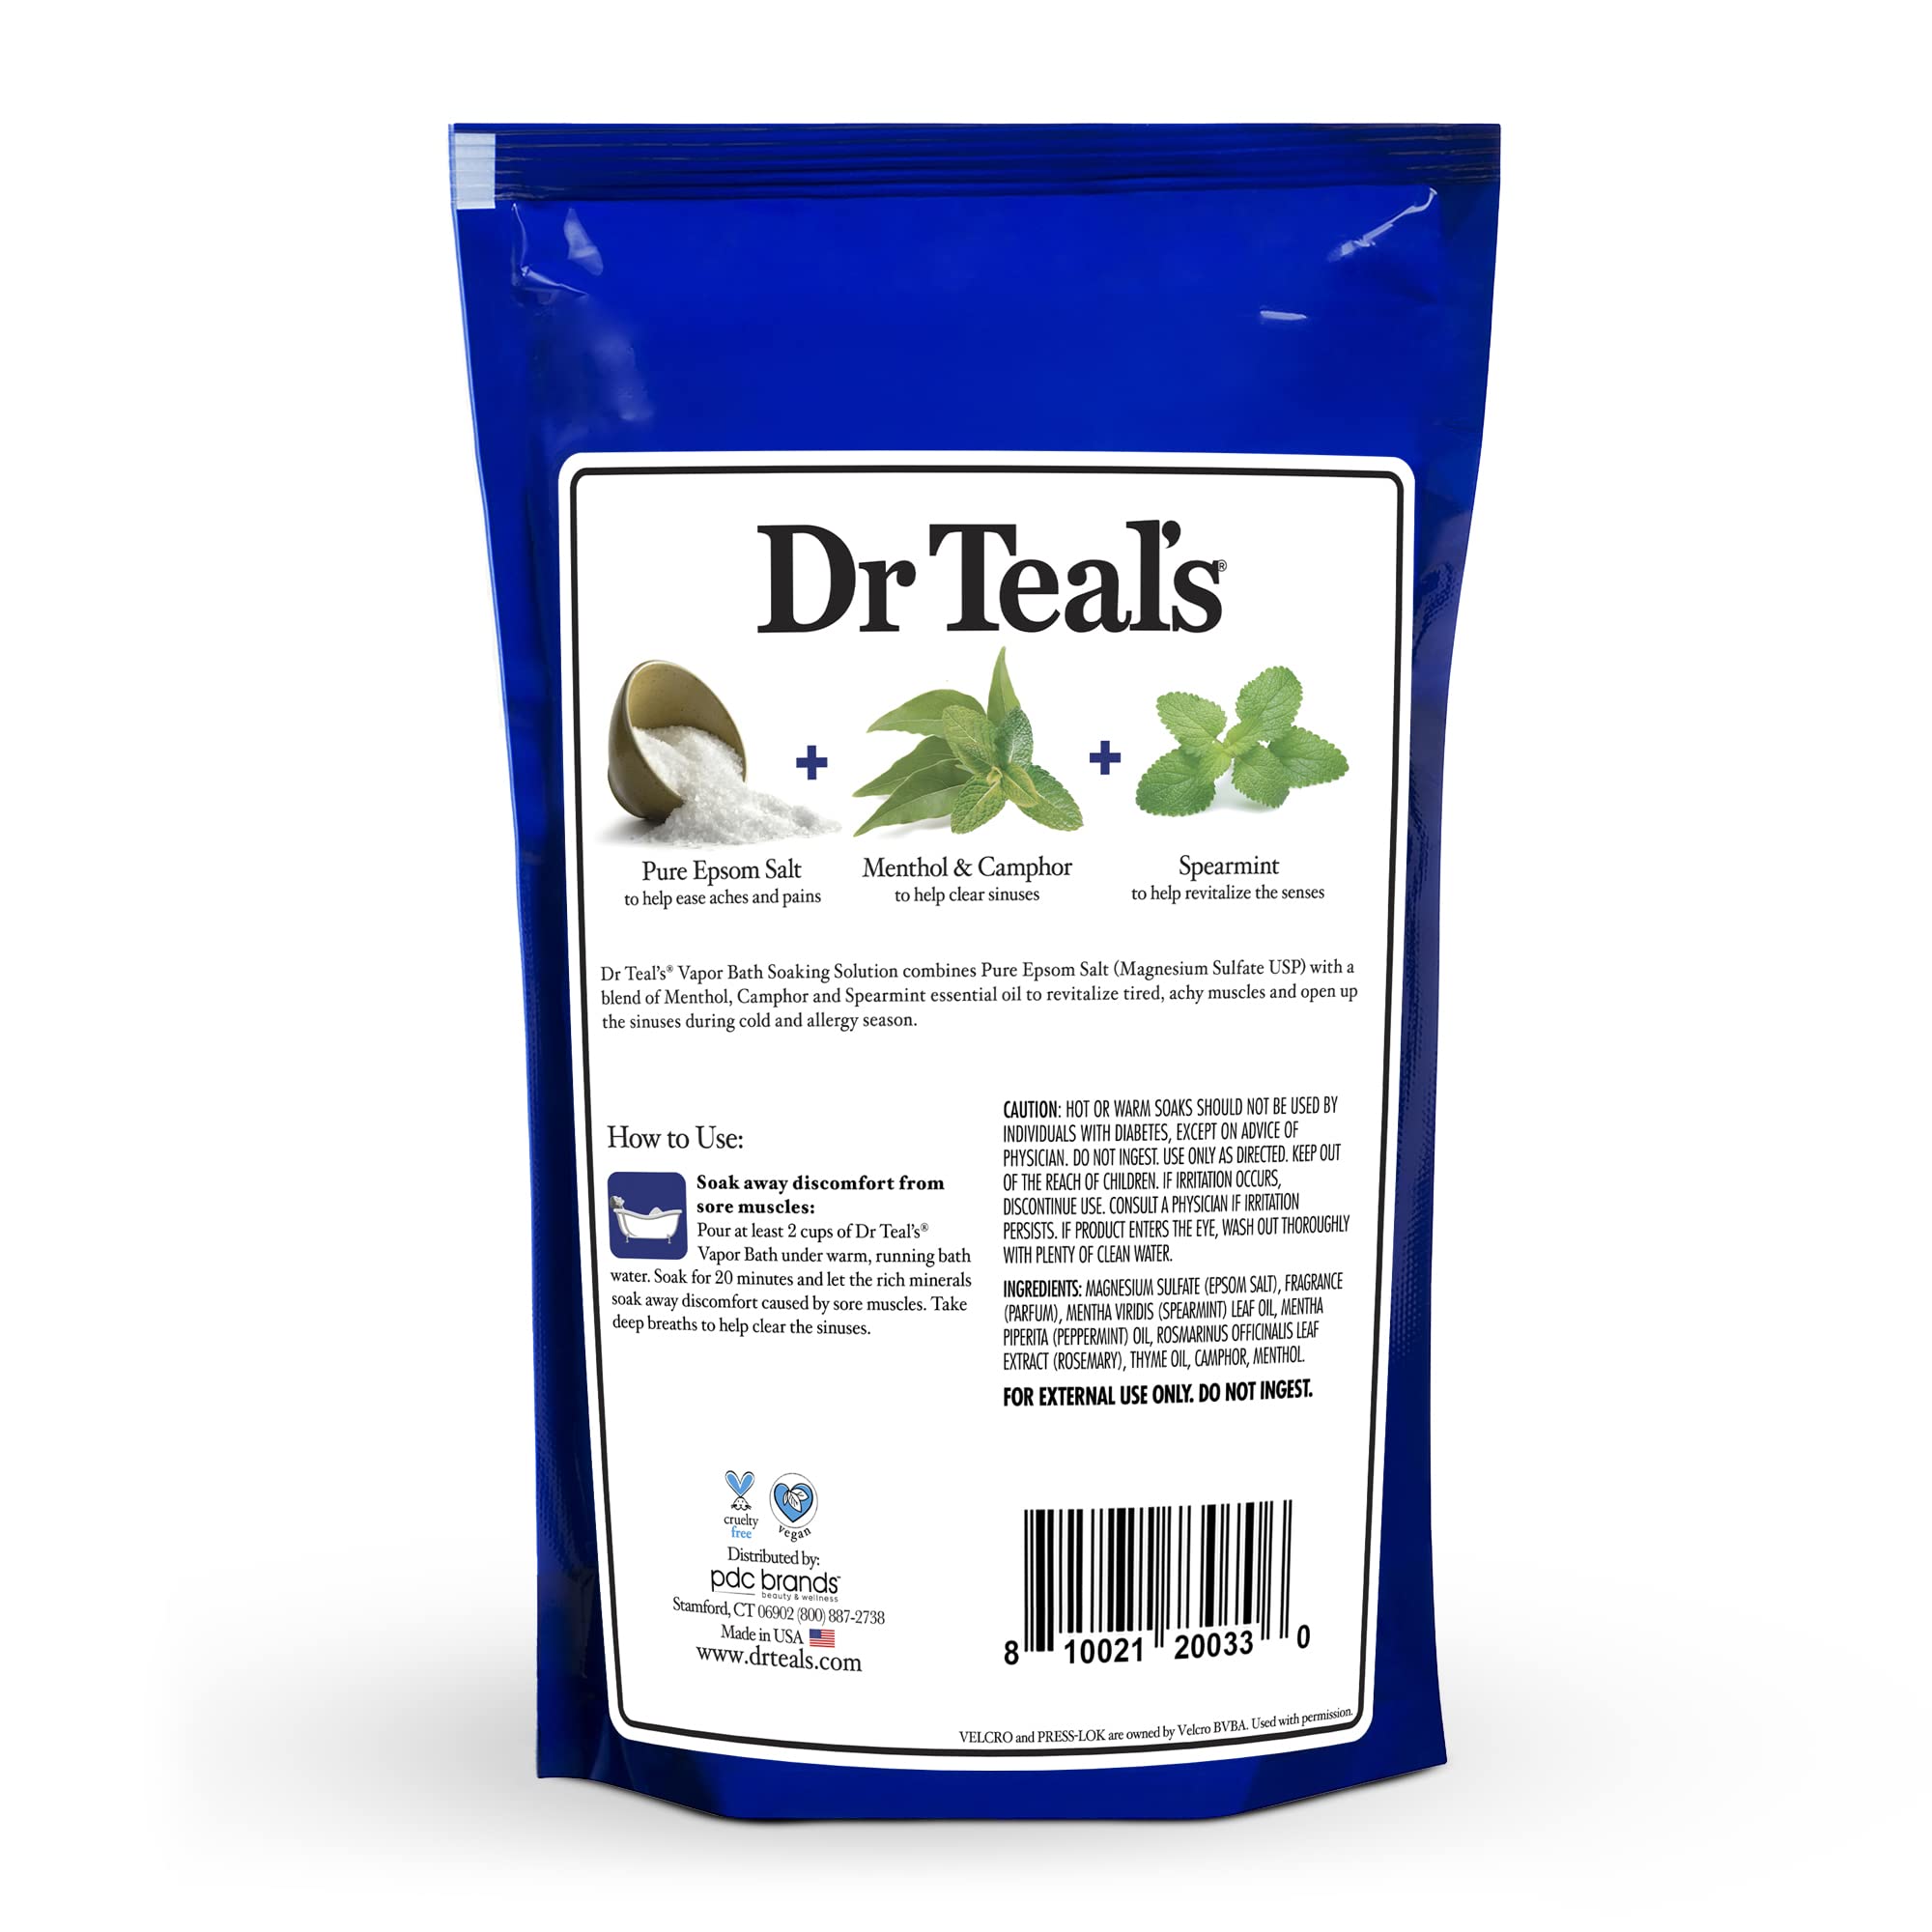 Dr Teal's Pure Epsom Salt, Vapor Bath with Menthol & Camphor, 2 lbs (Pack of 3) (Packaging May Vary)